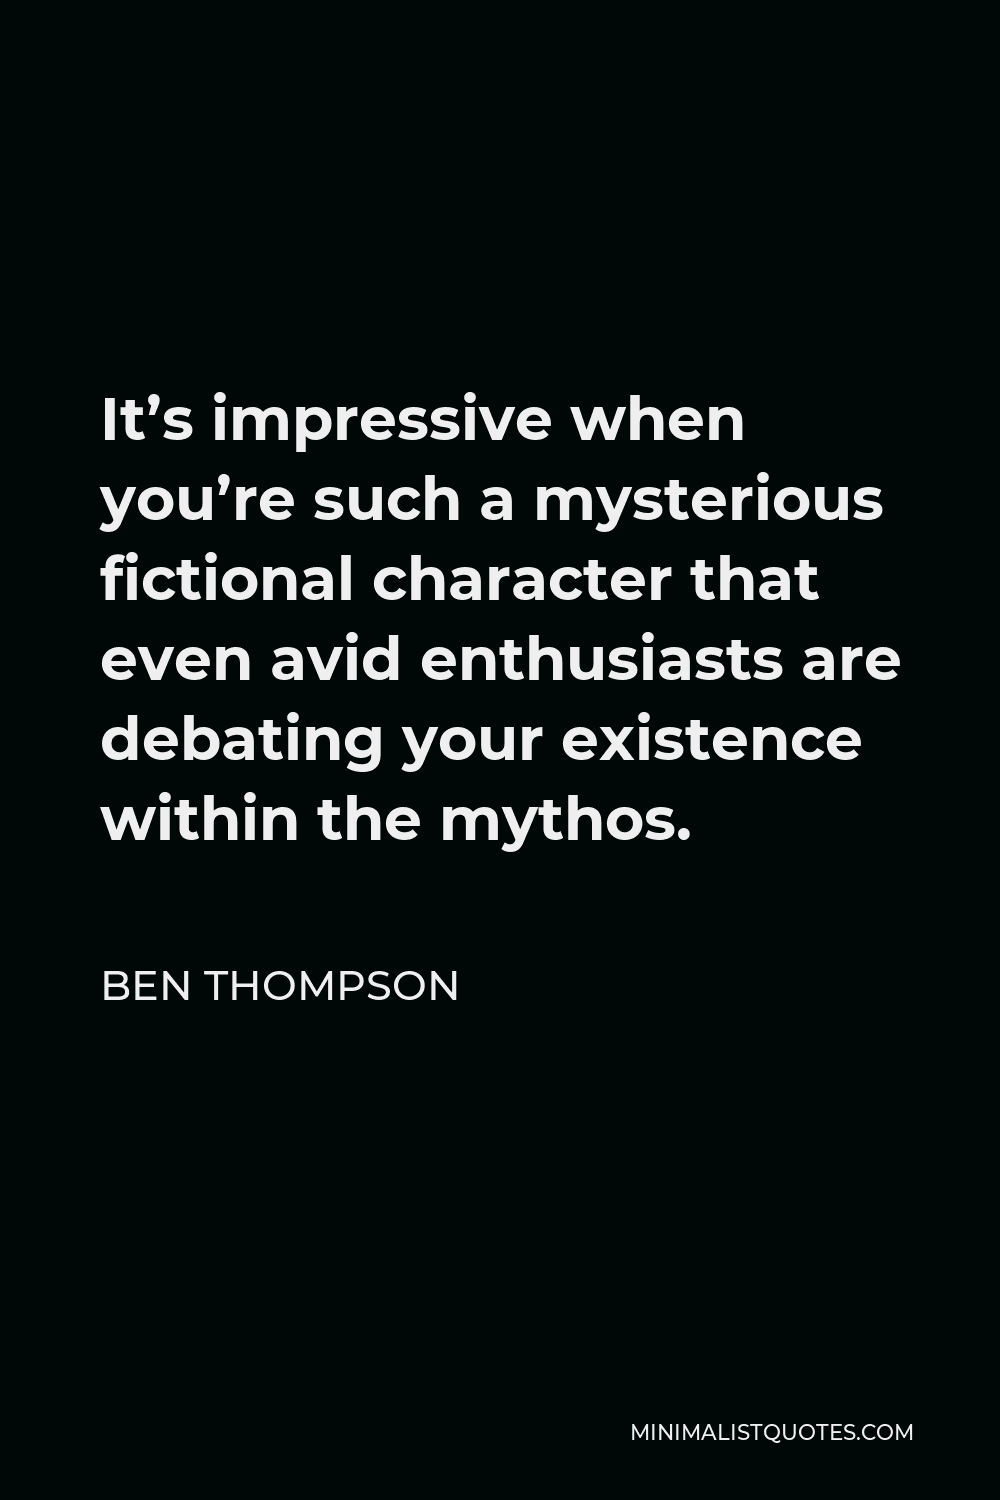 Ben Thompson Quote - It’s impressive when you’re such a mysterious fictional character that even avid enthusiasts are debating your existence within the mythos.